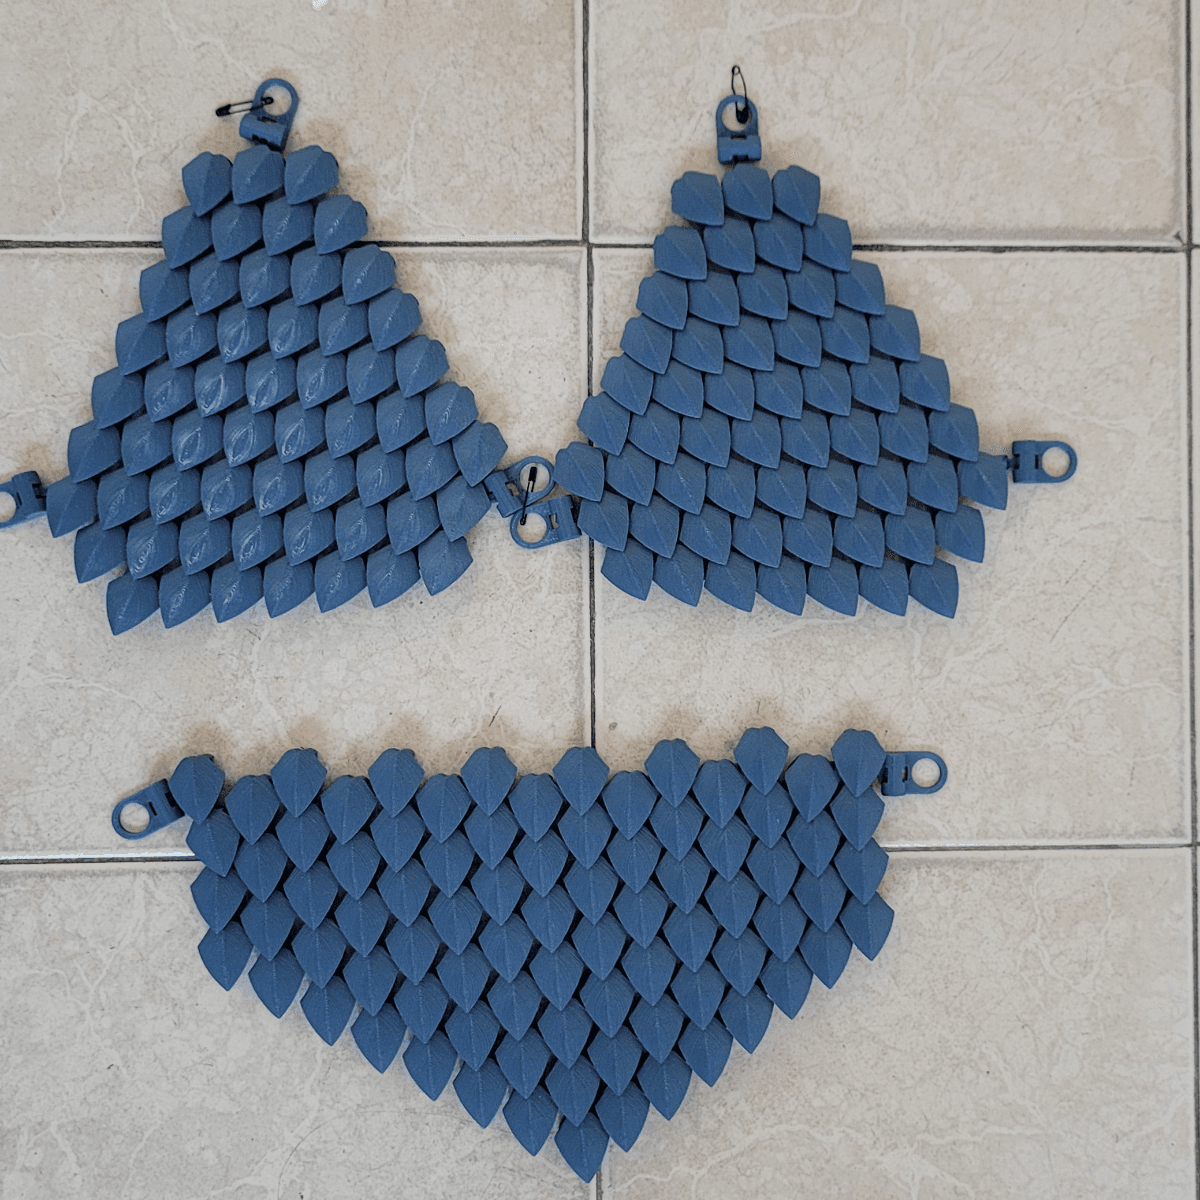 Articulated Scalemail Lingerie 3D Printing Model 3d model